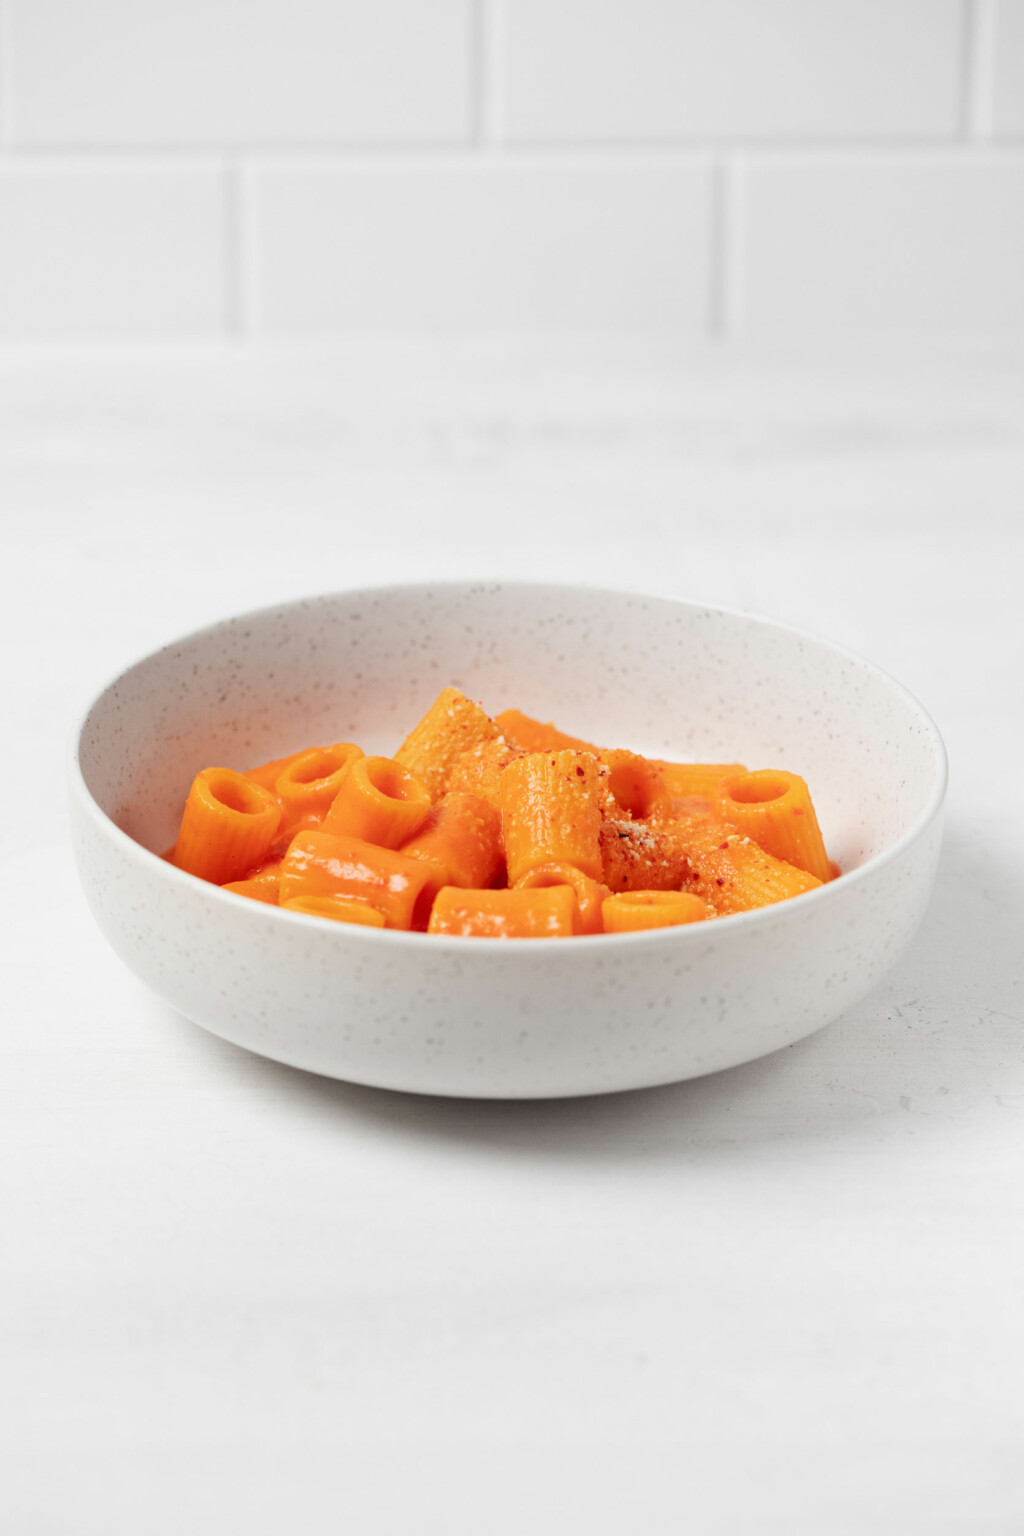 A shallow, round white bowl holds rigatoni pasta with a creamy, red-colored sauce. It rests on a white surface.